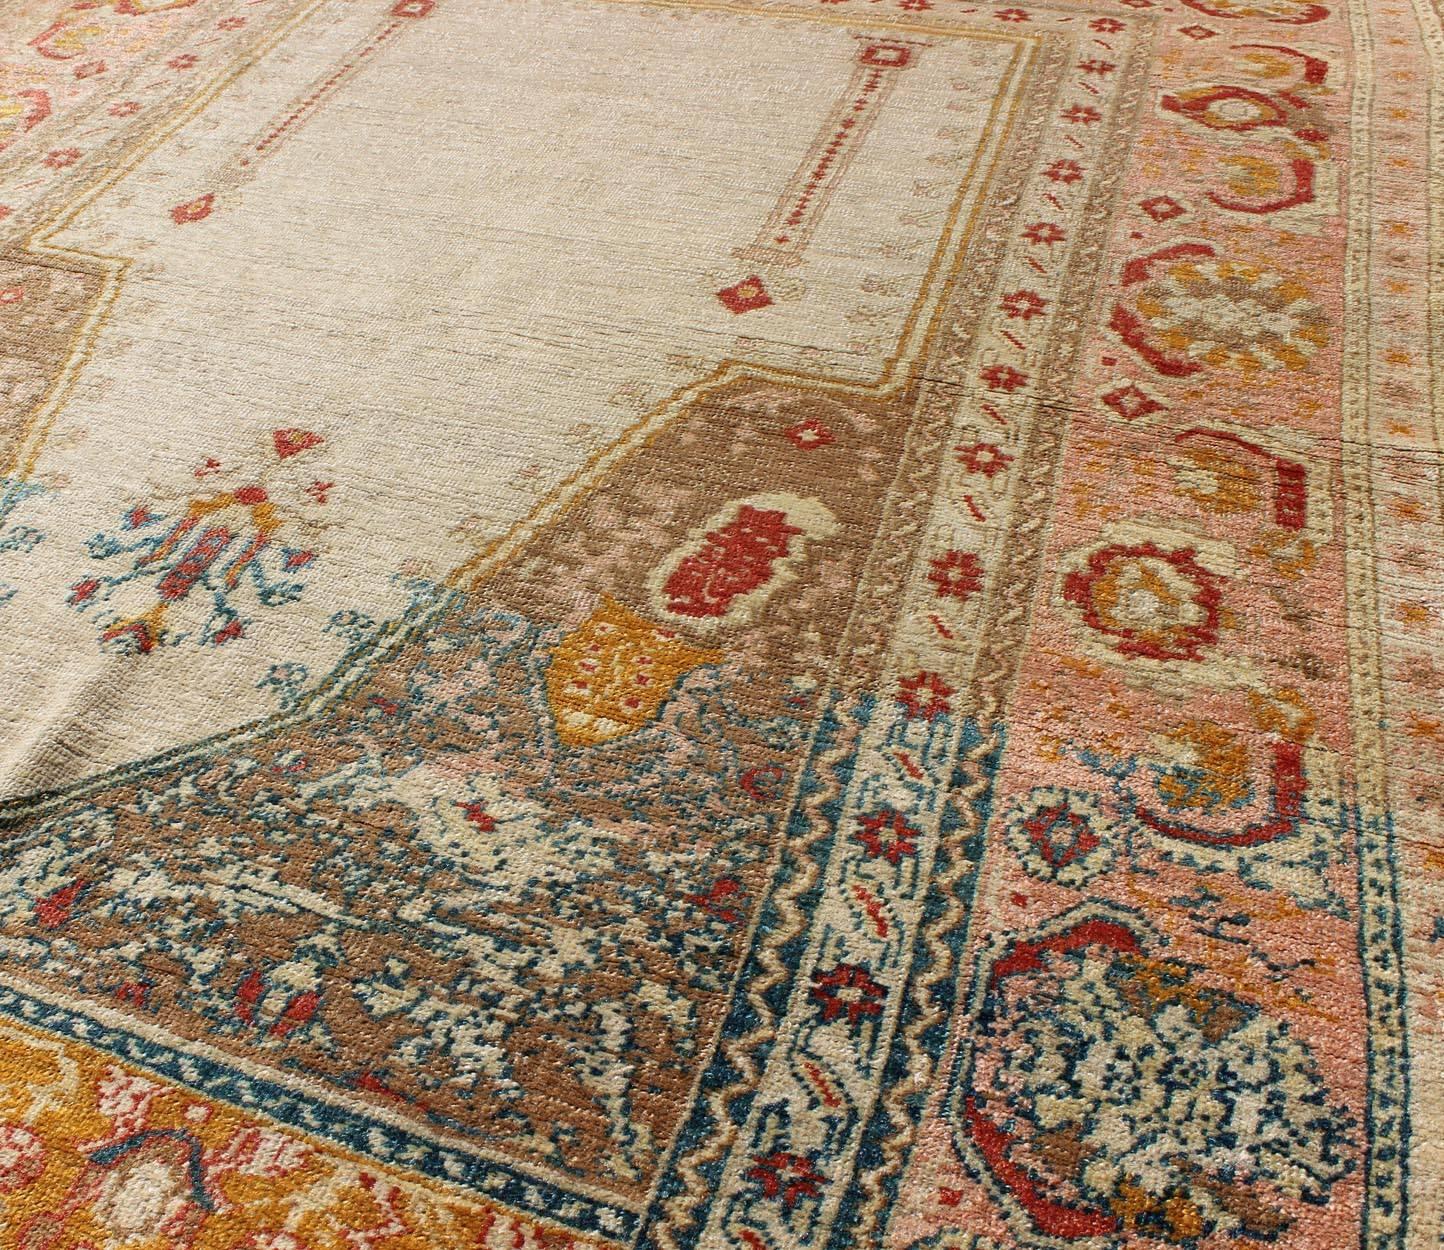 Antique Turkish Sivas Prayer Rug with Floral Design in Ivory, Taupe, and Pink In Good Condition For Sale In Atlanta, GA